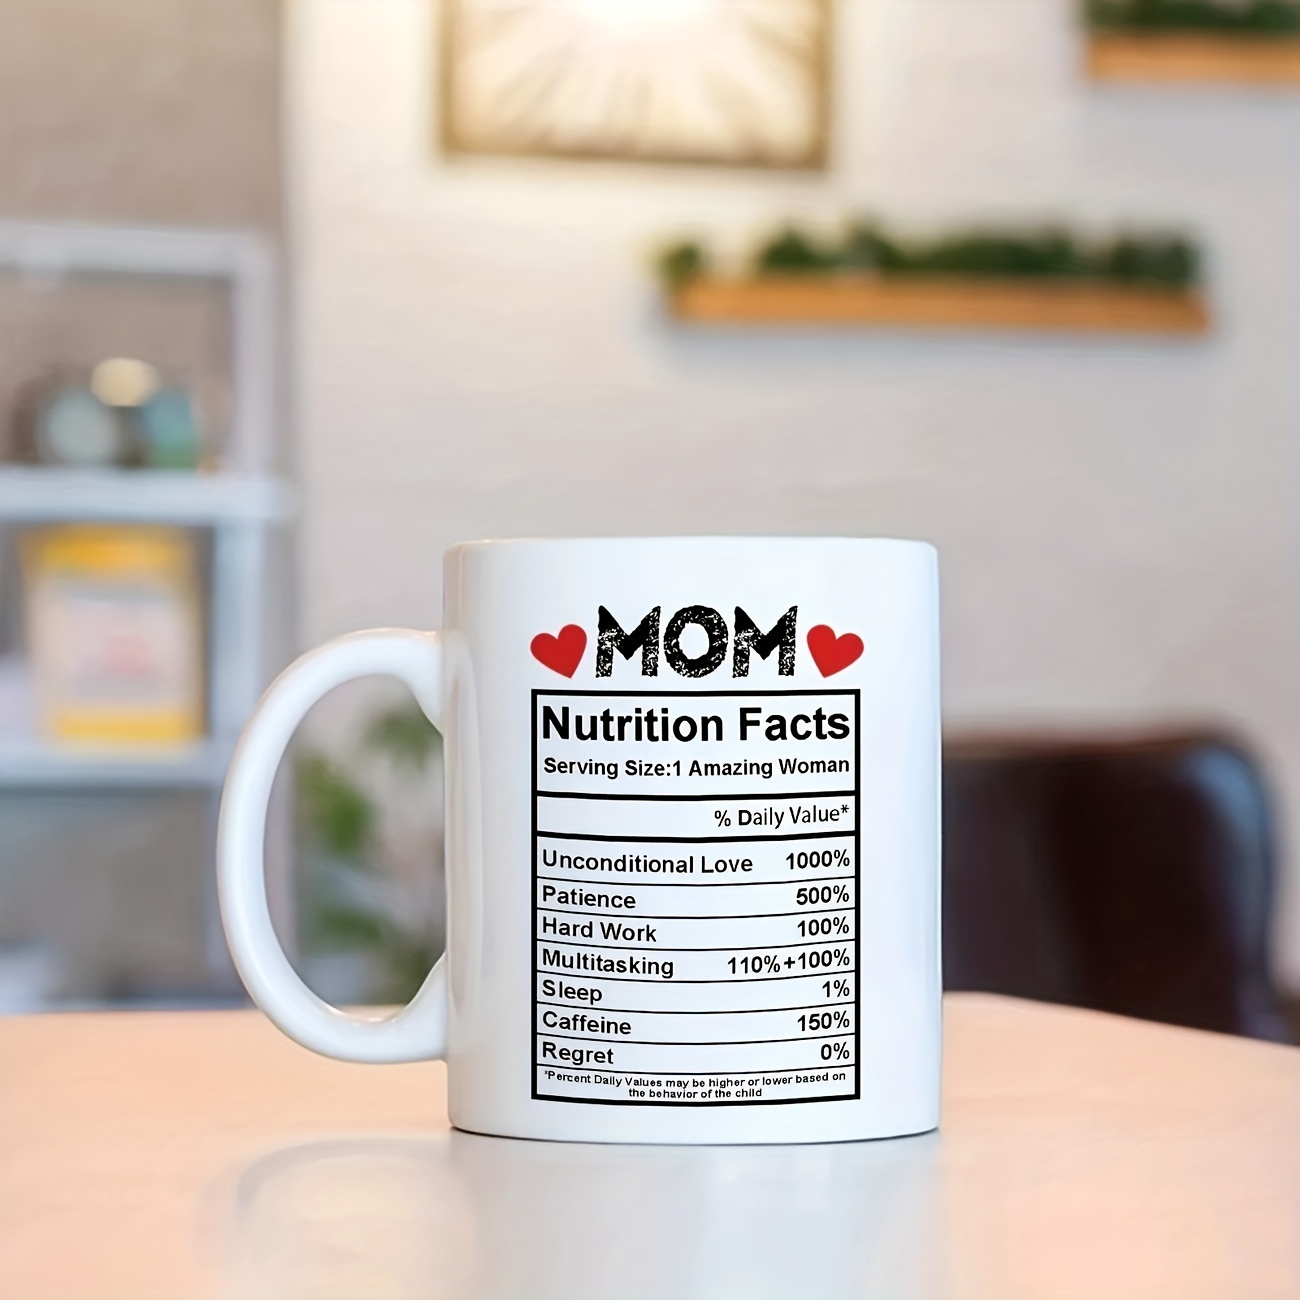 Mom Ceramic Coffee Mug, White Tea Mug For Mom, Classic Drinking Cup With  Handle, Novelty Gift, For Hot Or Cold Drinks Like Cocoa, Milk, Tea Or  Water, Mother's Day Gifts, Birthday Gifts 